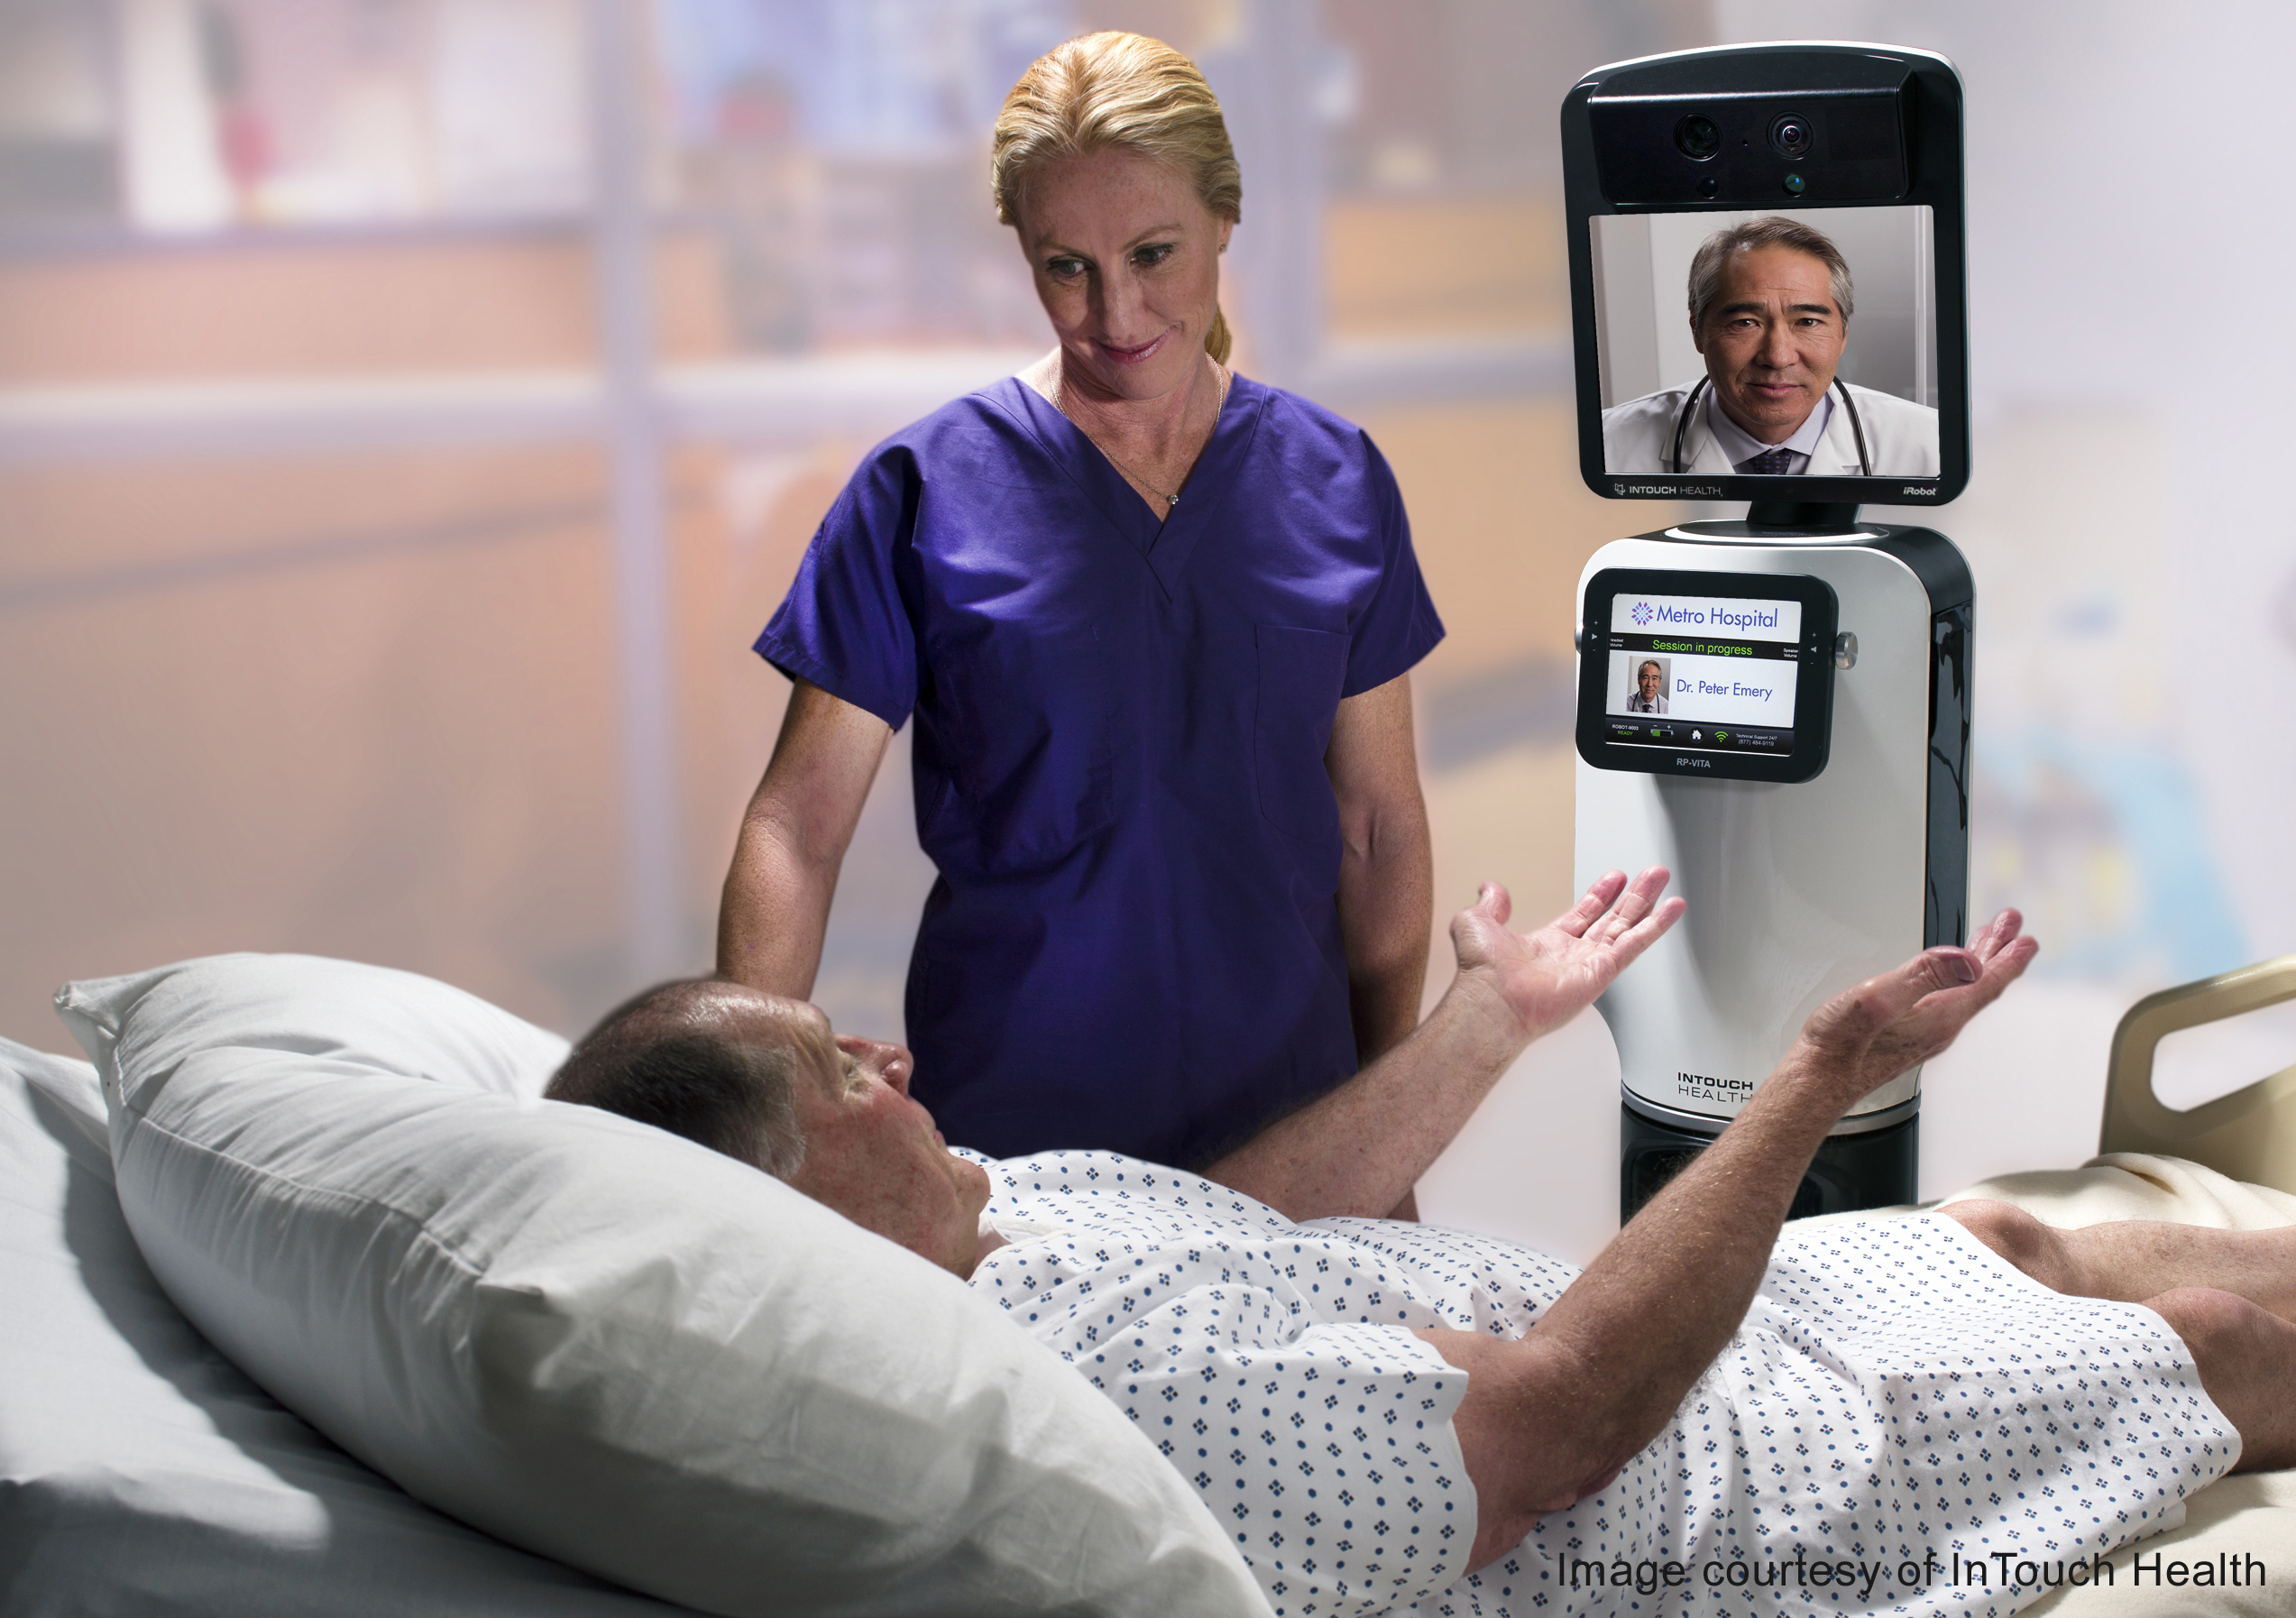 InTouch Health and iRobot Announce First Customers to Install The New Face Telemedicine | Business Wire